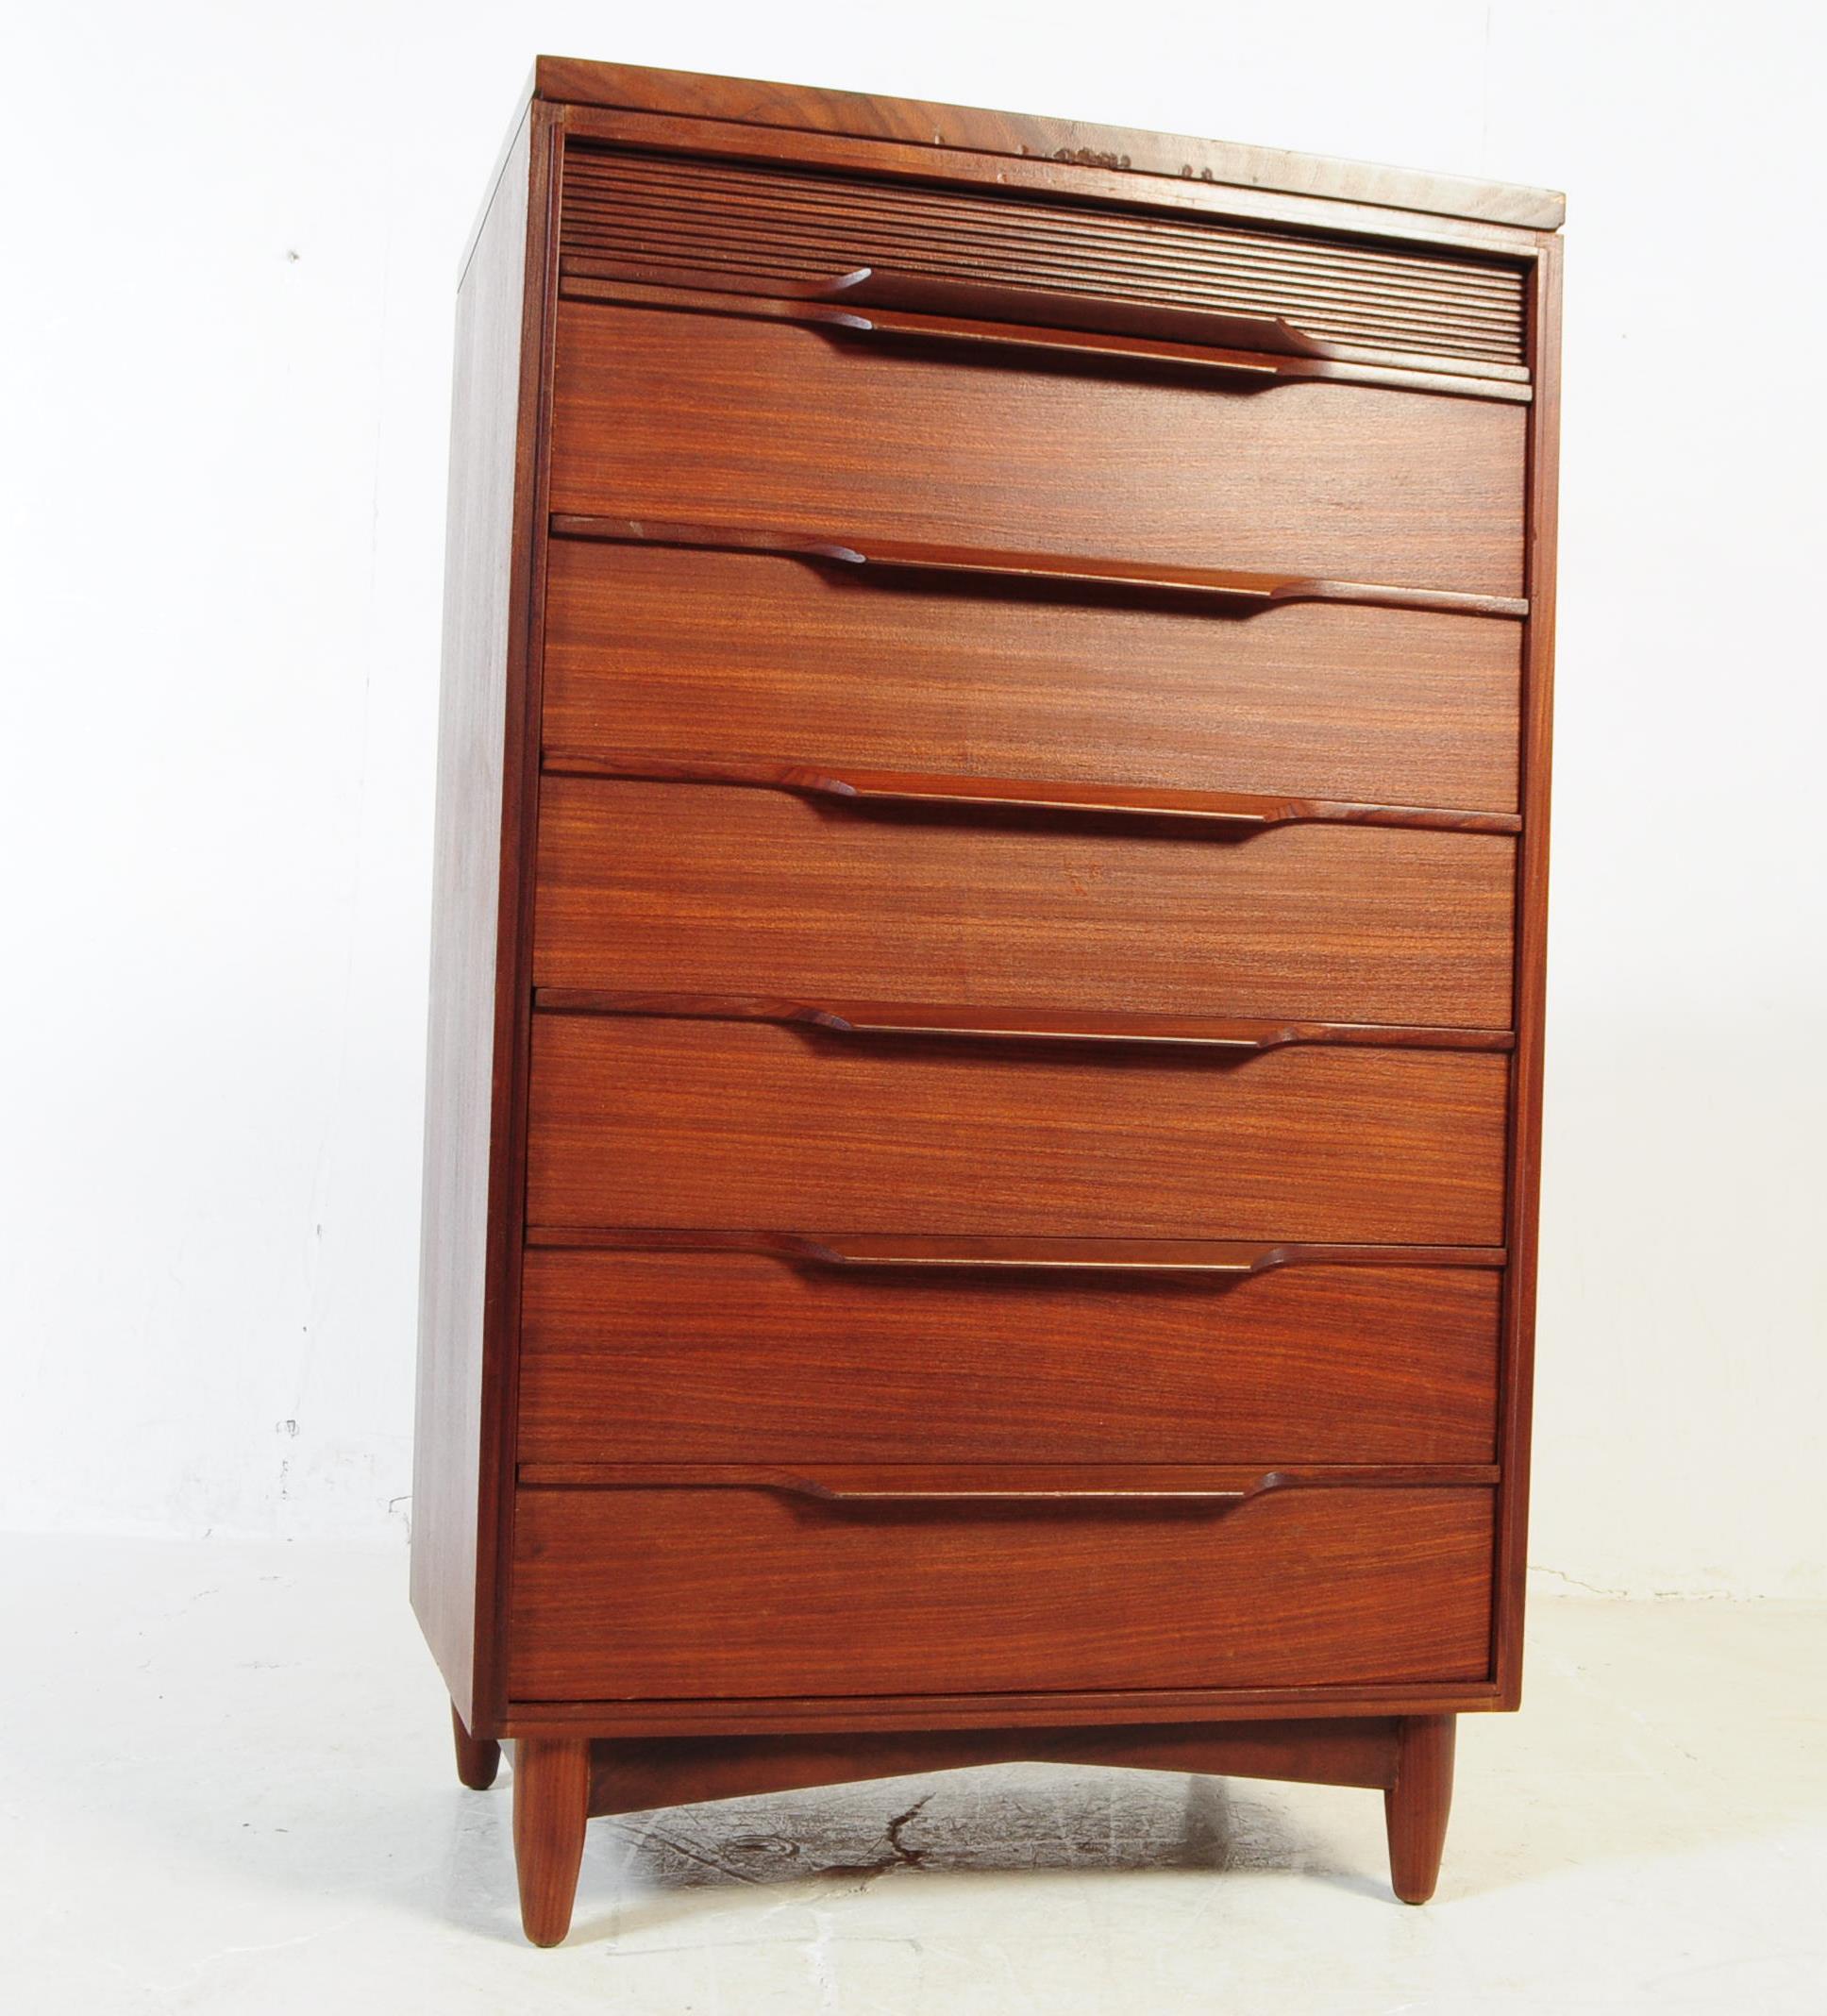 WHITE AND NEWTON - MID CENTURY PEDESTAL CHEST OF DRAWERS